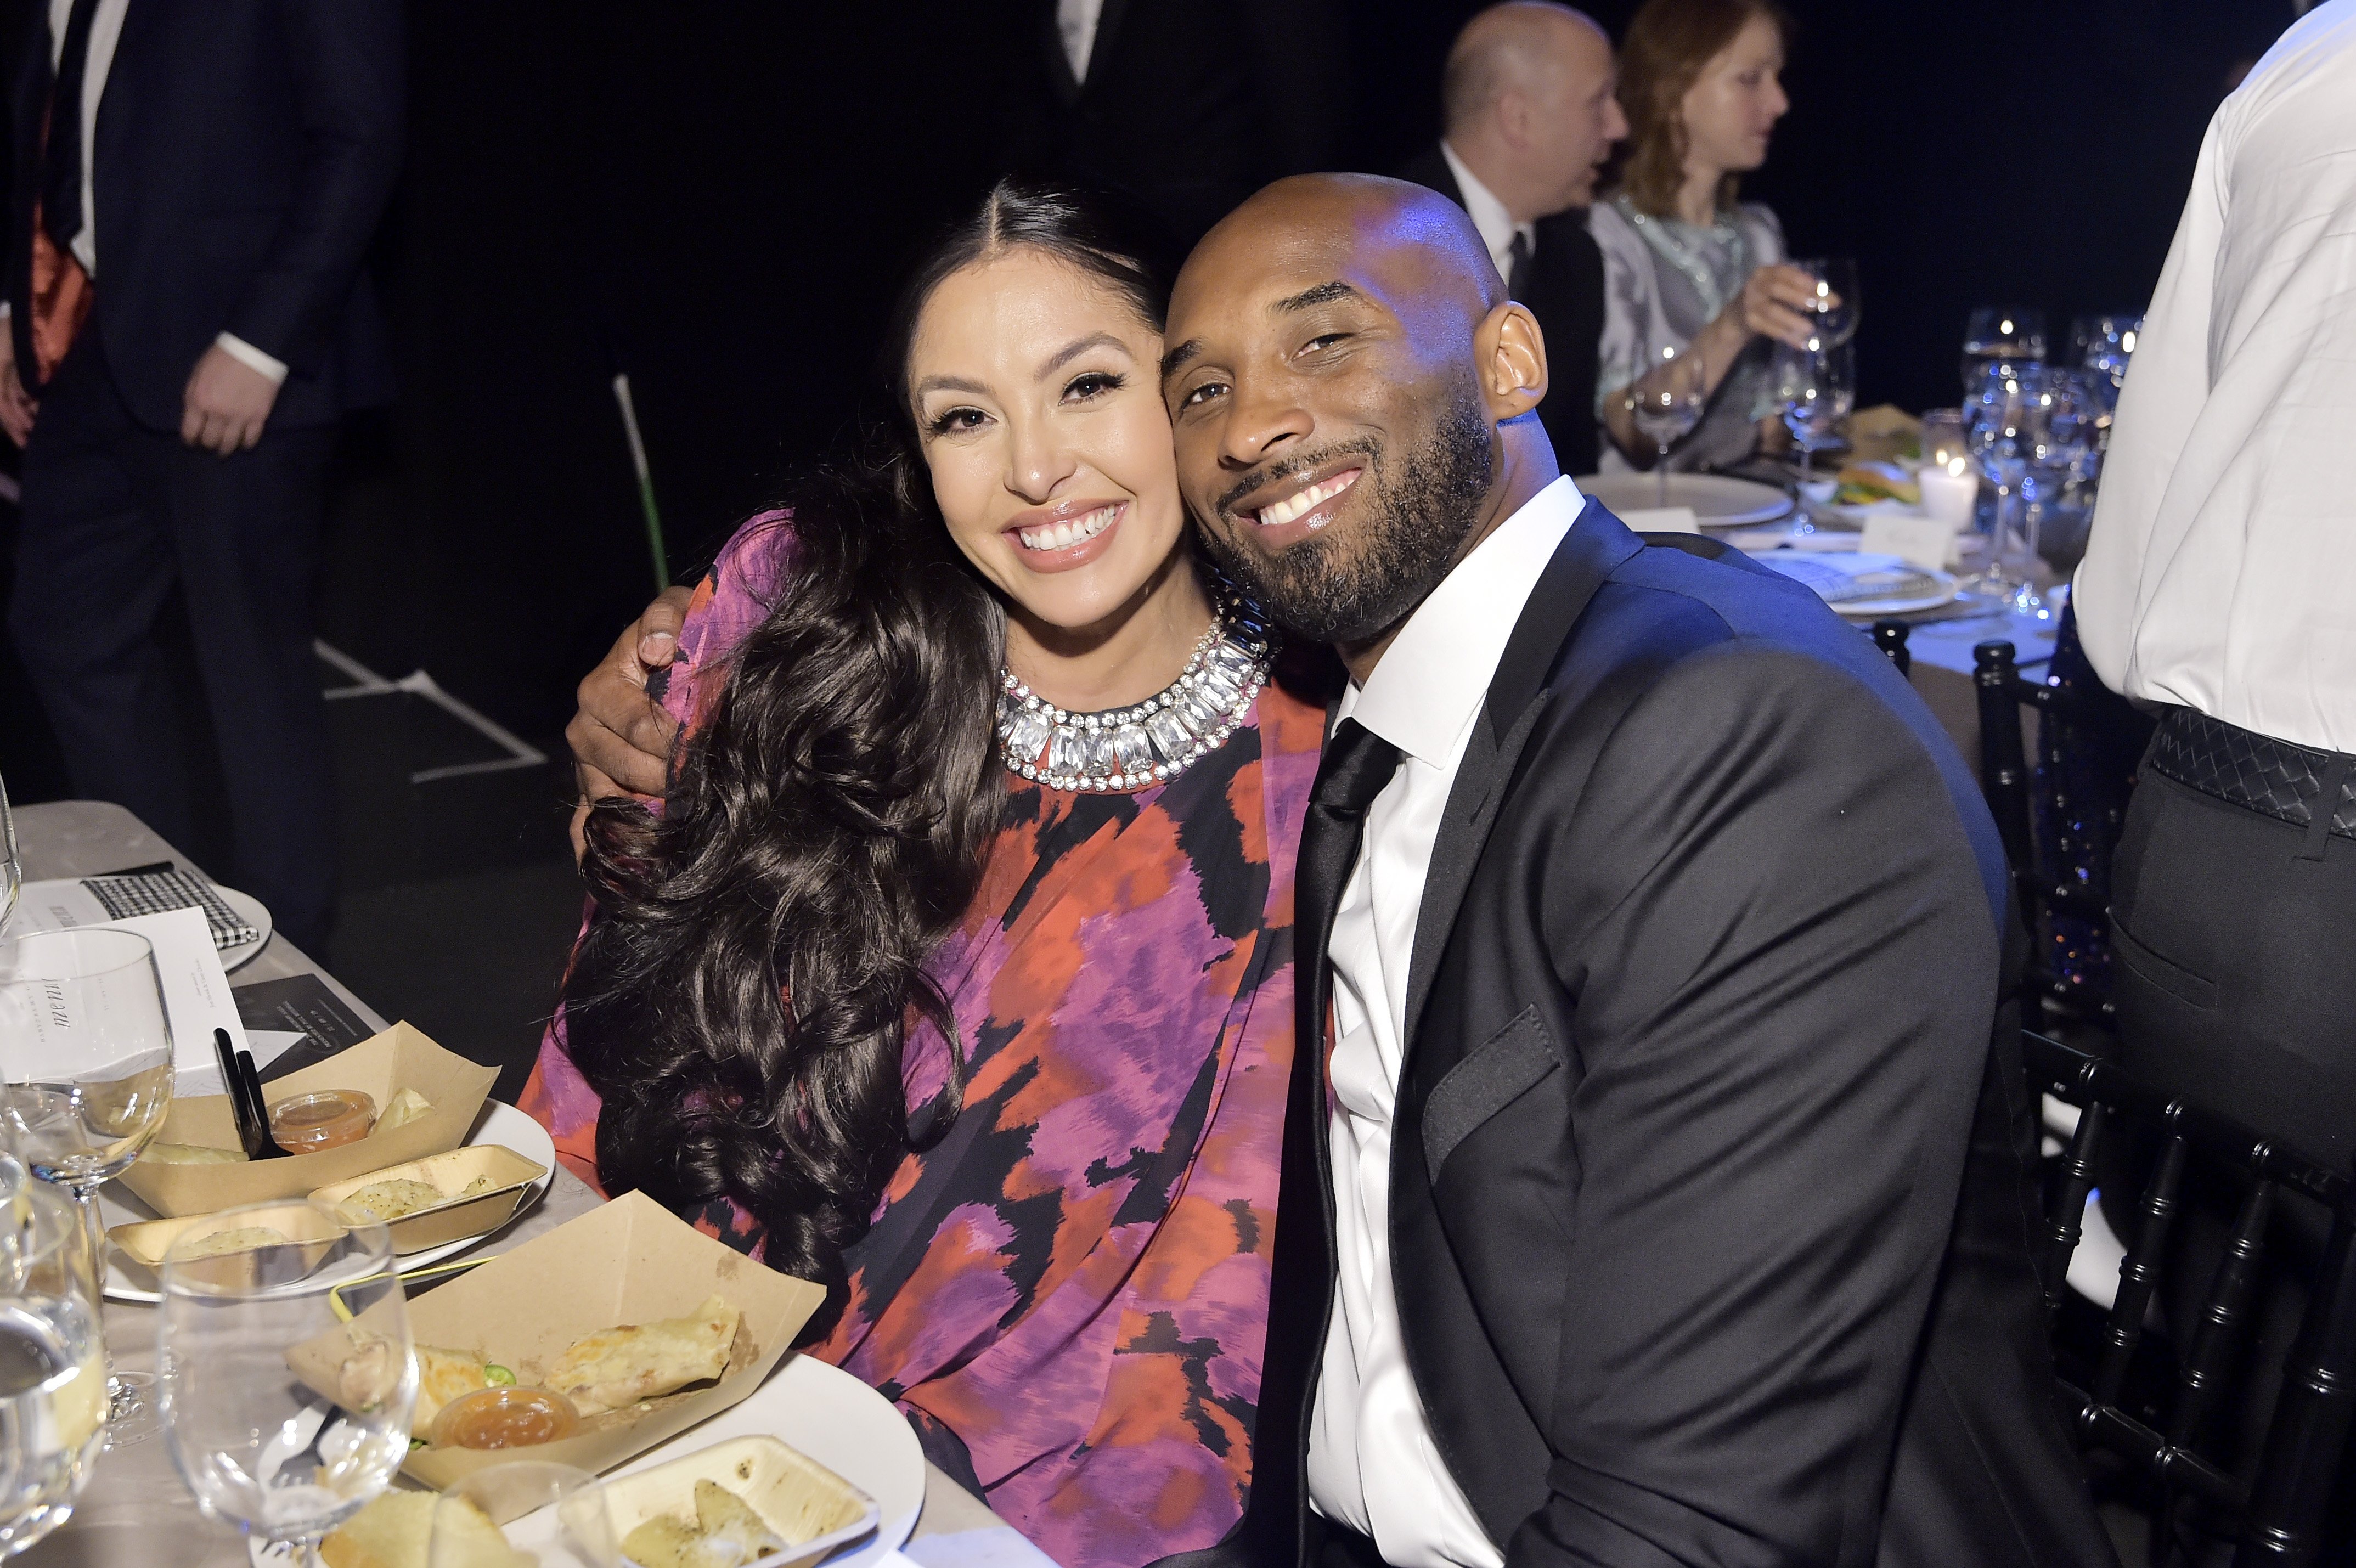 Vanessa Laine Bryant and Kobe Bryant attend the 2019 Baby2Baby Gala presented by Paul Mitchell on November 09, 2019, in Los Angeles, California. | Photo: Getty Images.